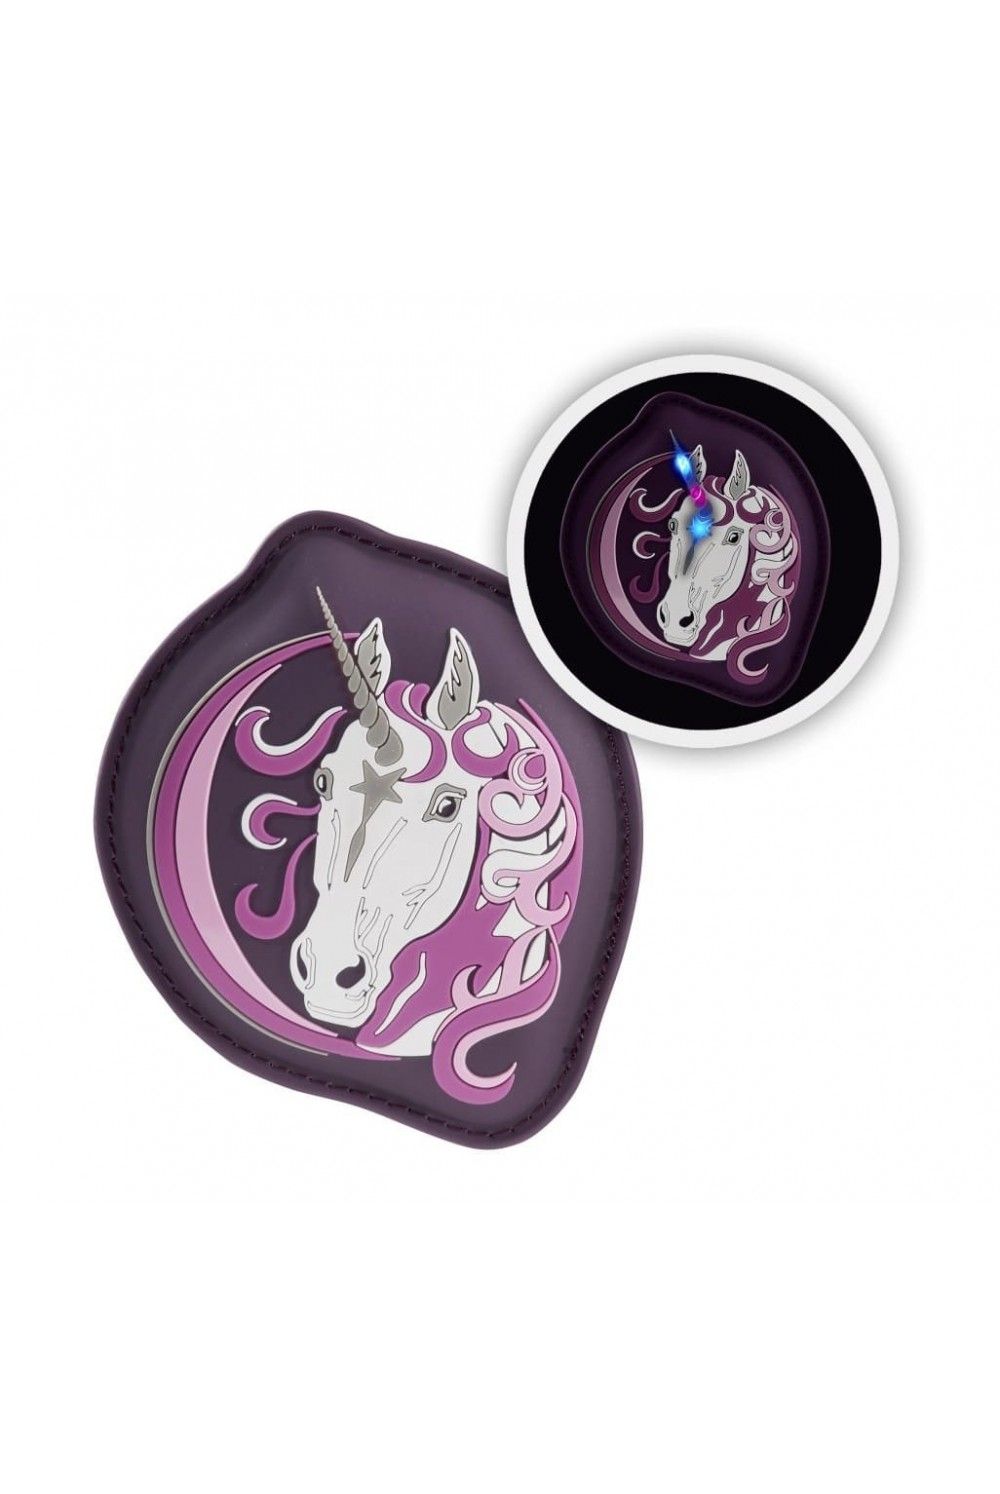 Step by Step Magnetic Motive Accessories FLASH Mystic Unicorn